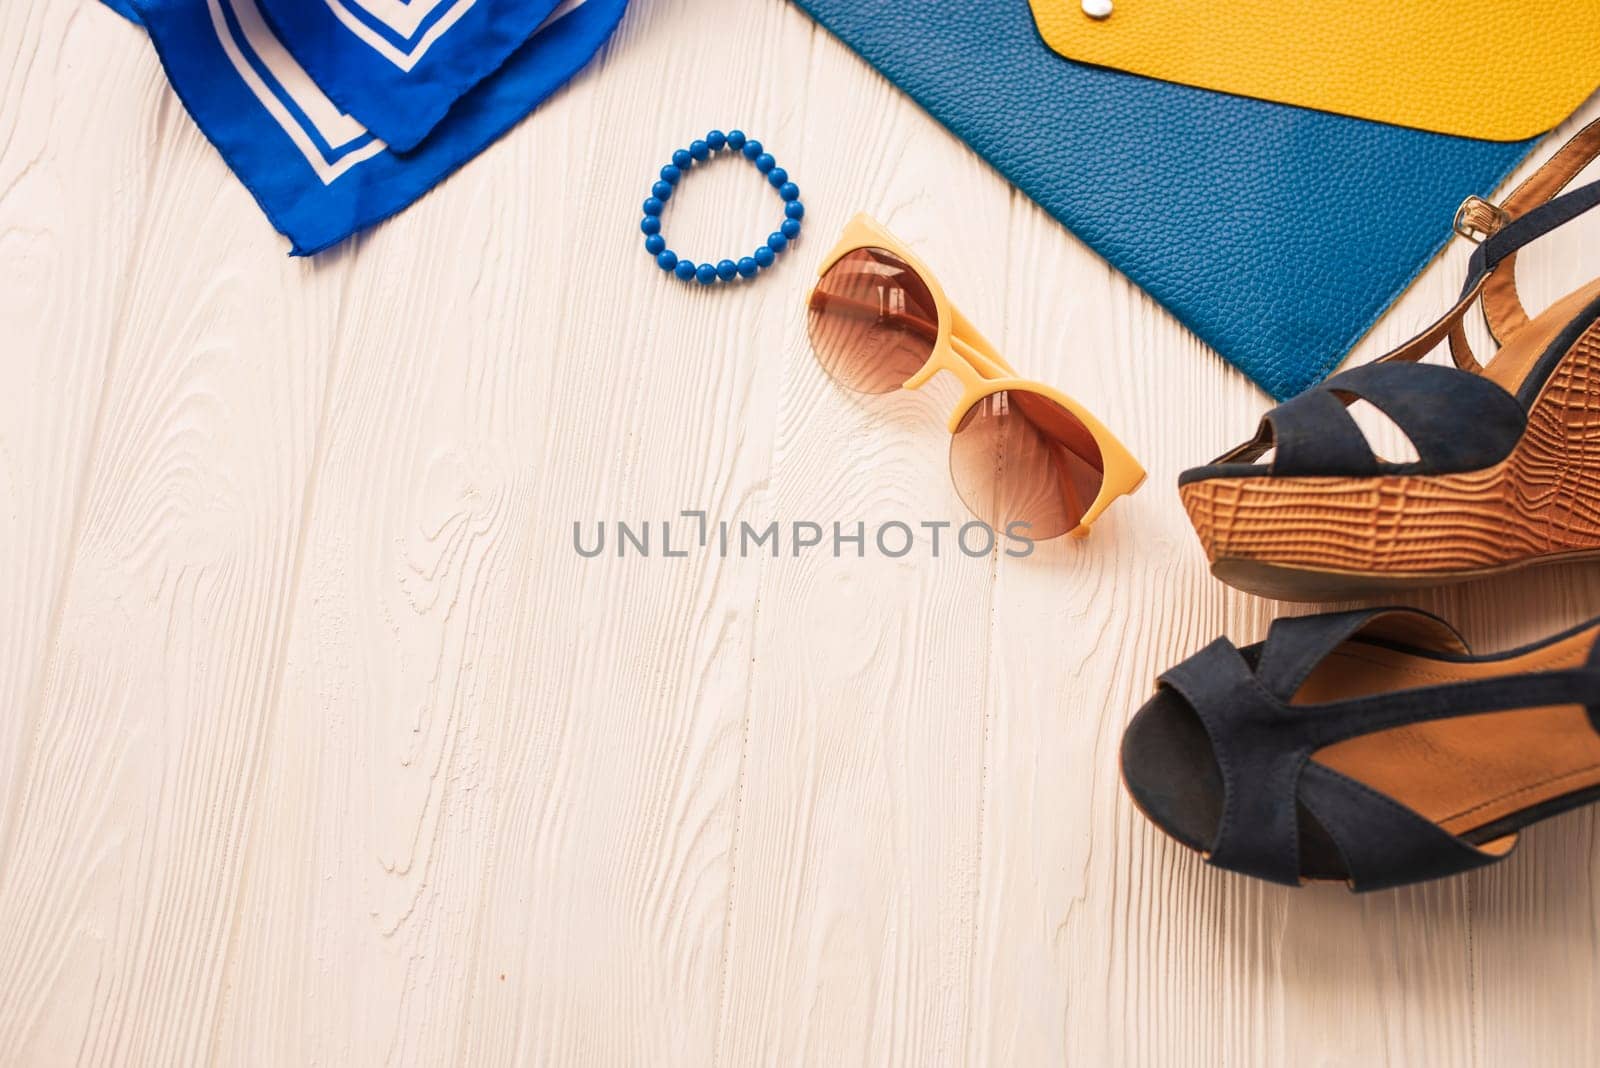 Sunglasses bijouterie jewelry bracelets clutch bag wedges shoes. Summer background mockup. top view above white wooden background Summer fashion accessories beach. Women summer design Vacation concept